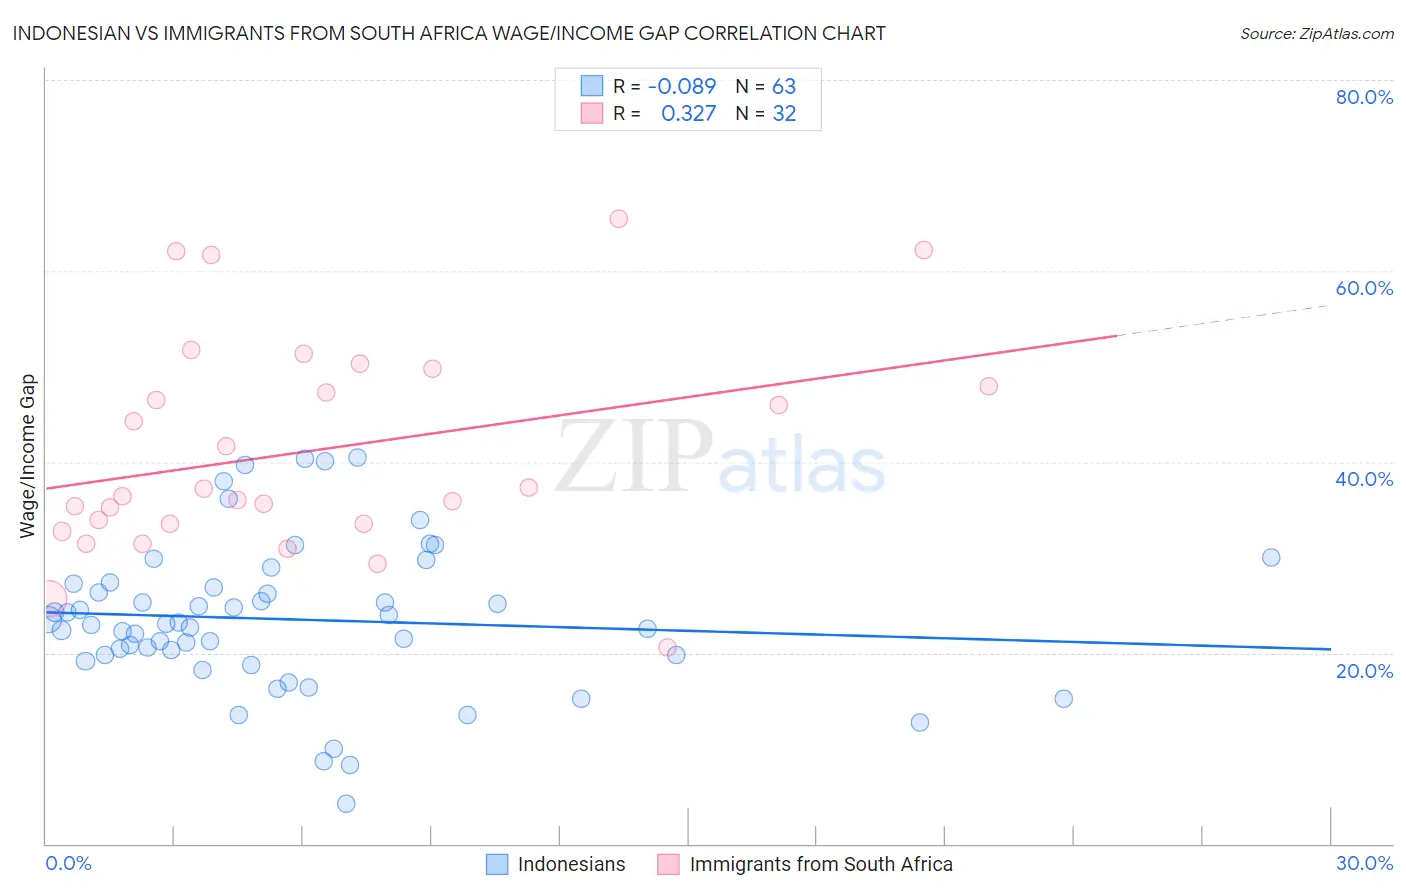 Indonesian vs Immigrants from South Africa Wage/Income Gap